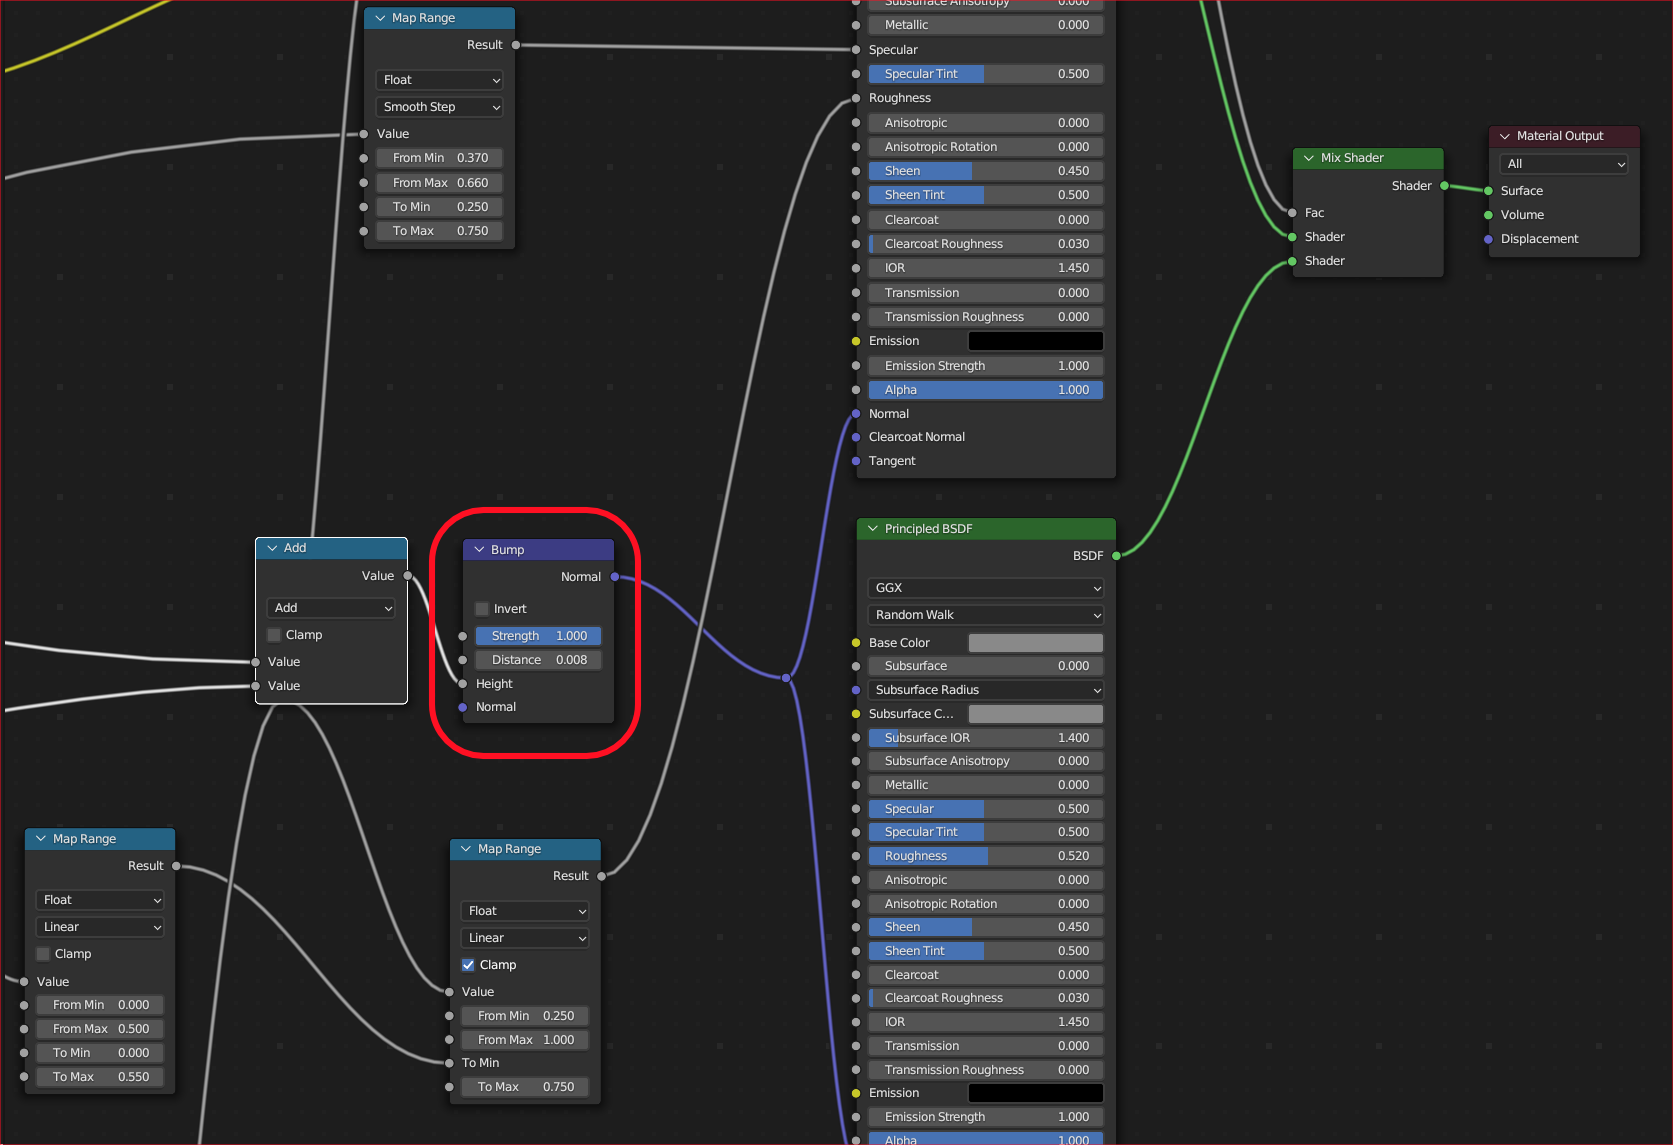 Screenshot showing the Bump node in Blender's shading graph, which is not currently translated.